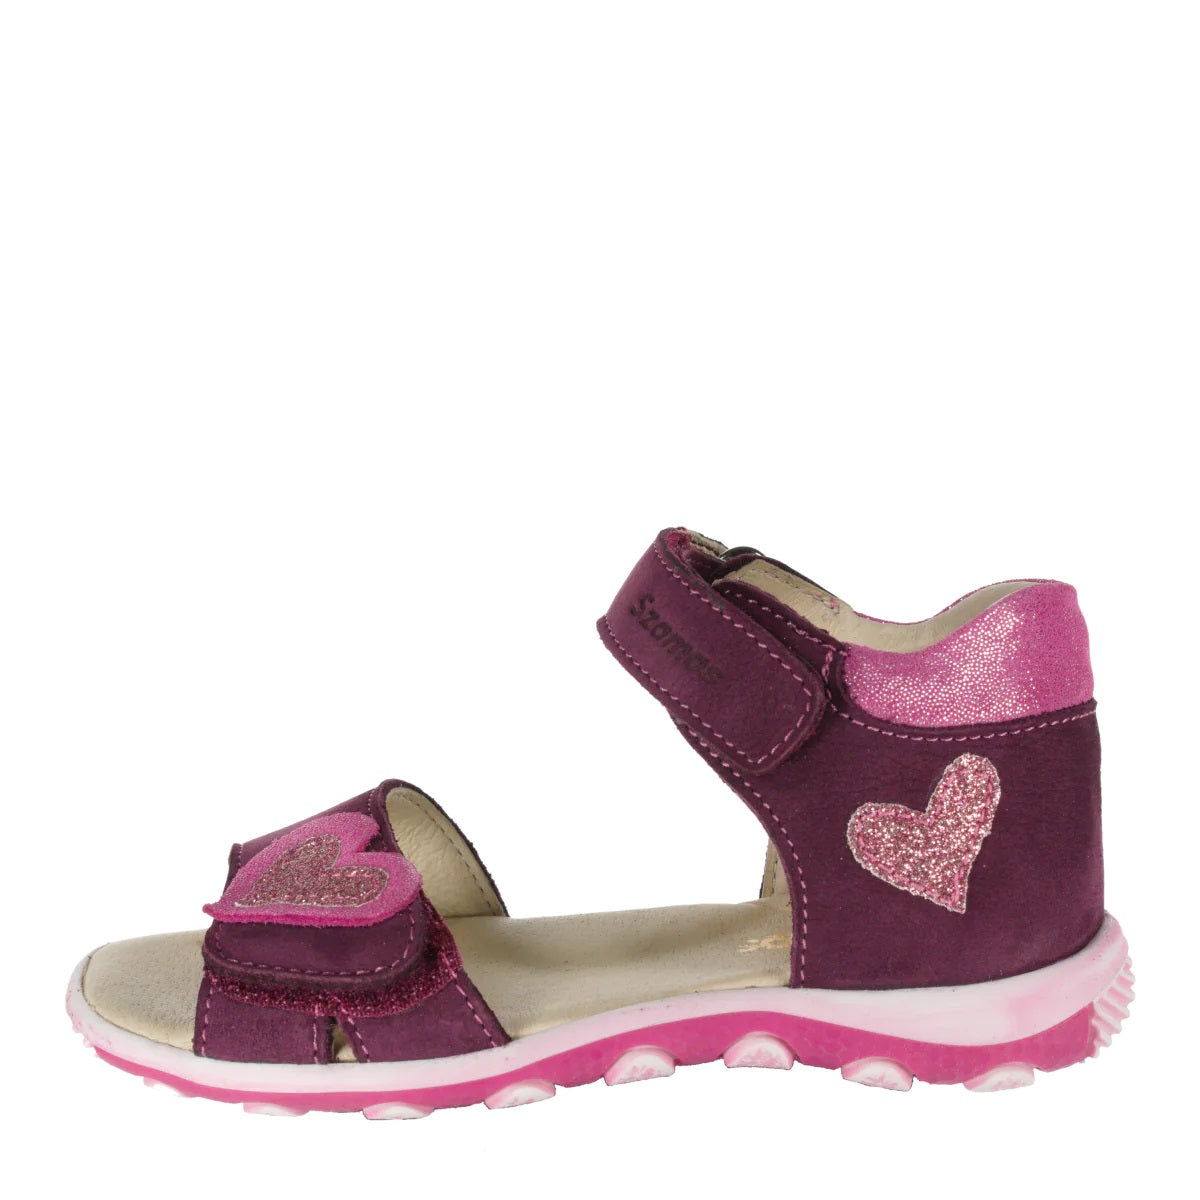 Szamos Kid Girl Sandals In Burgundy Color And Heart Pattern Double Velcro Strap - Made In Europe - shoekid.ca